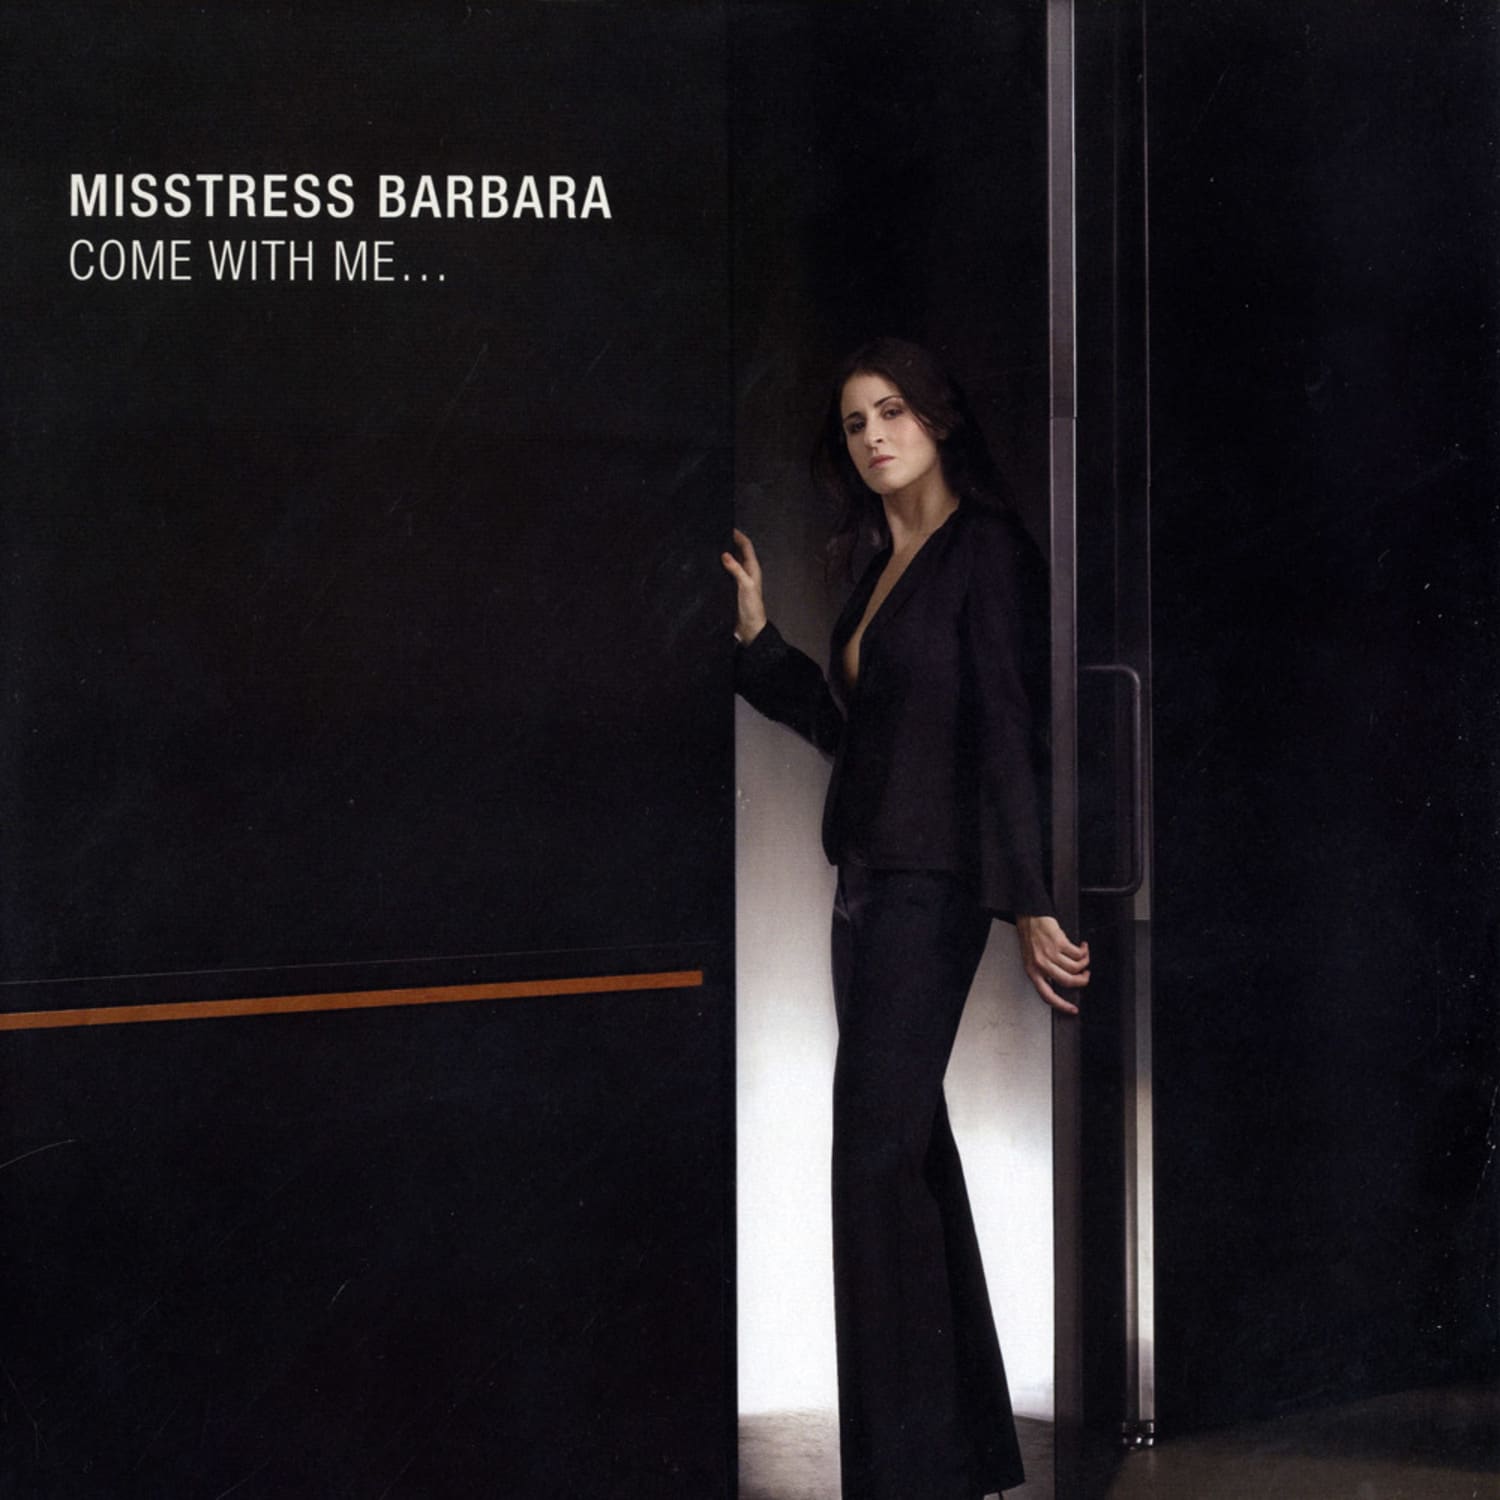 Misstress Barbara - COME WITH ME